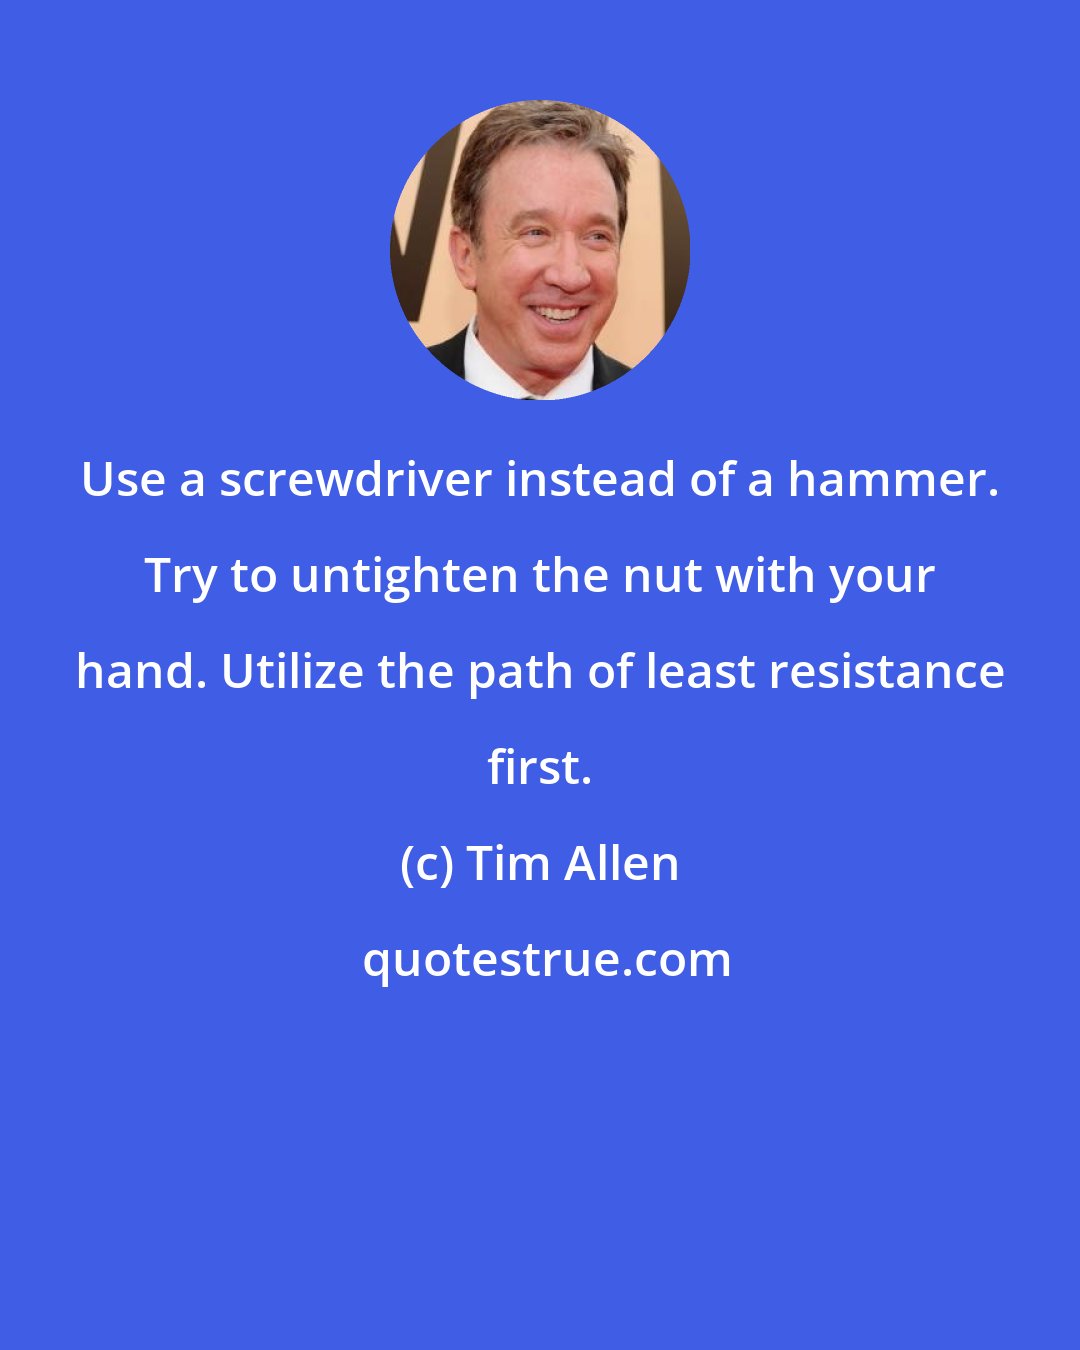 Tim Allen: Use a screwdriver instead of a hammer. Try to untighten the nut with your hand. Utilize the path of least resistance first.